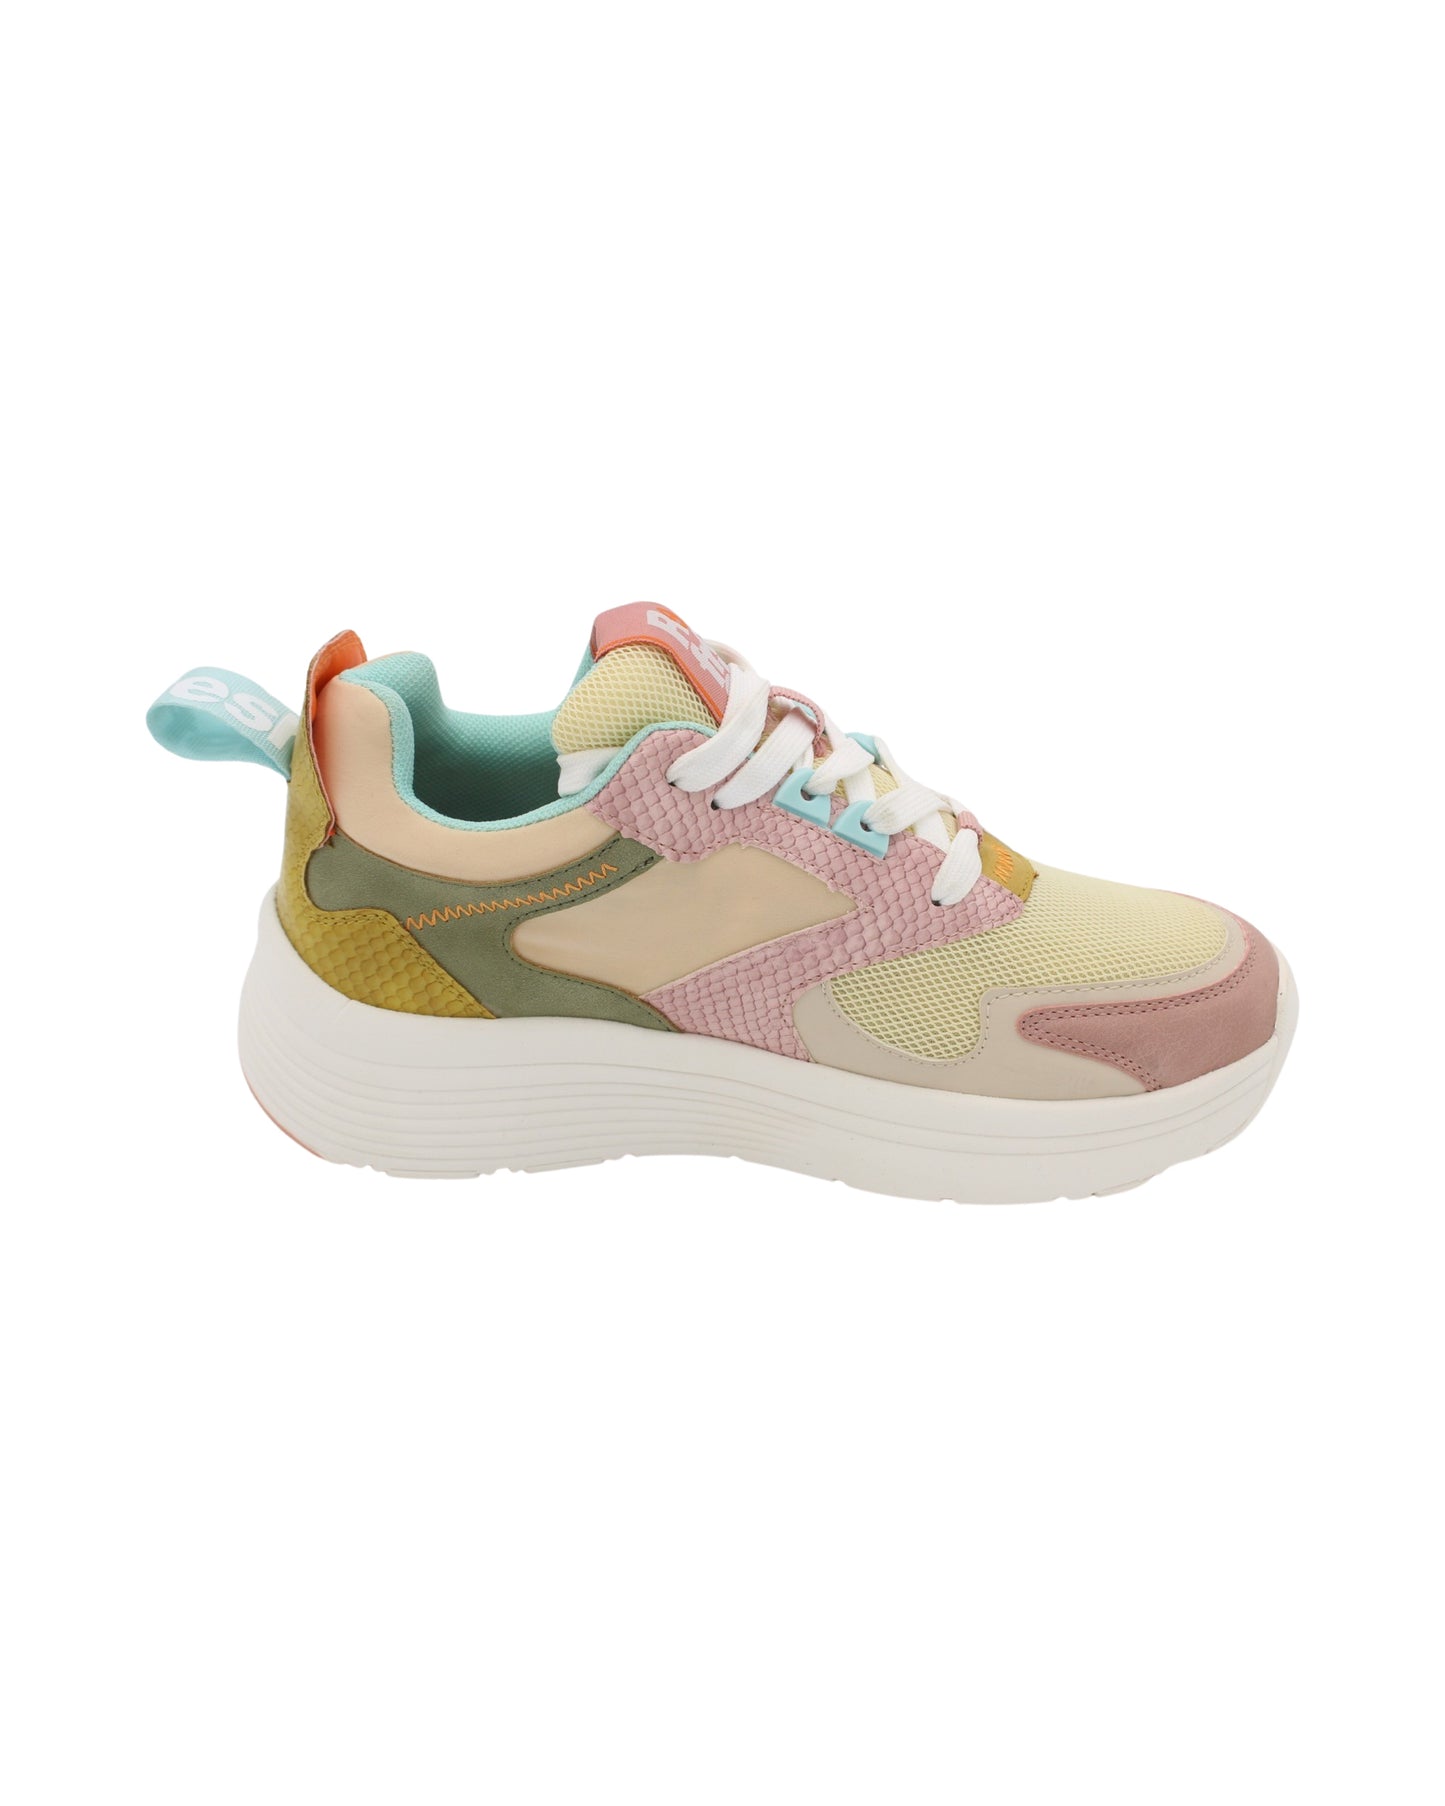 Refresh - Ladies Shoes Trainers Nude Multi (1977)